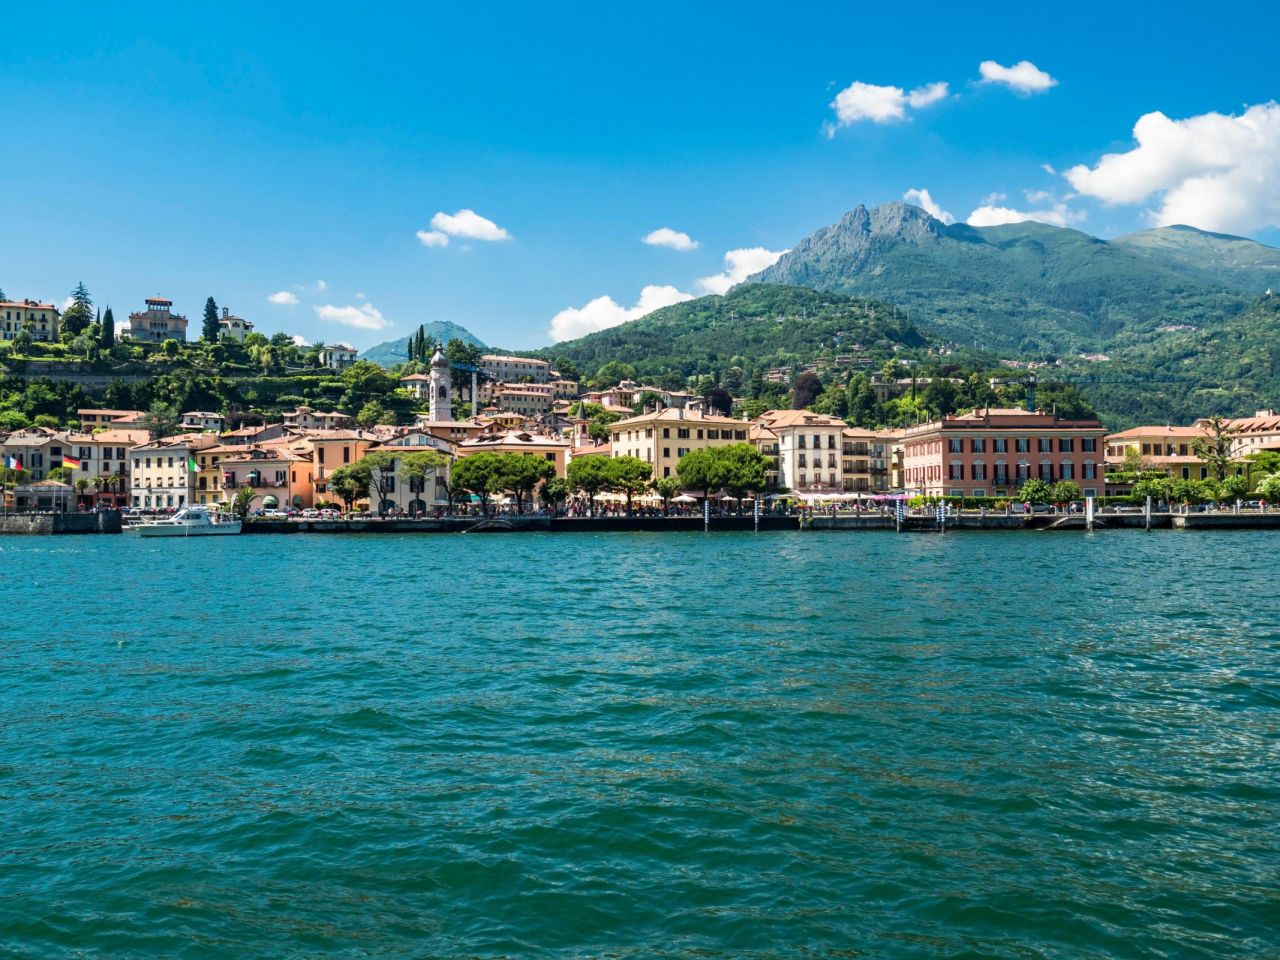 Lake Como is for relaxing, hiking, kayaking and enjoying some of Italy's most beautiful villages.